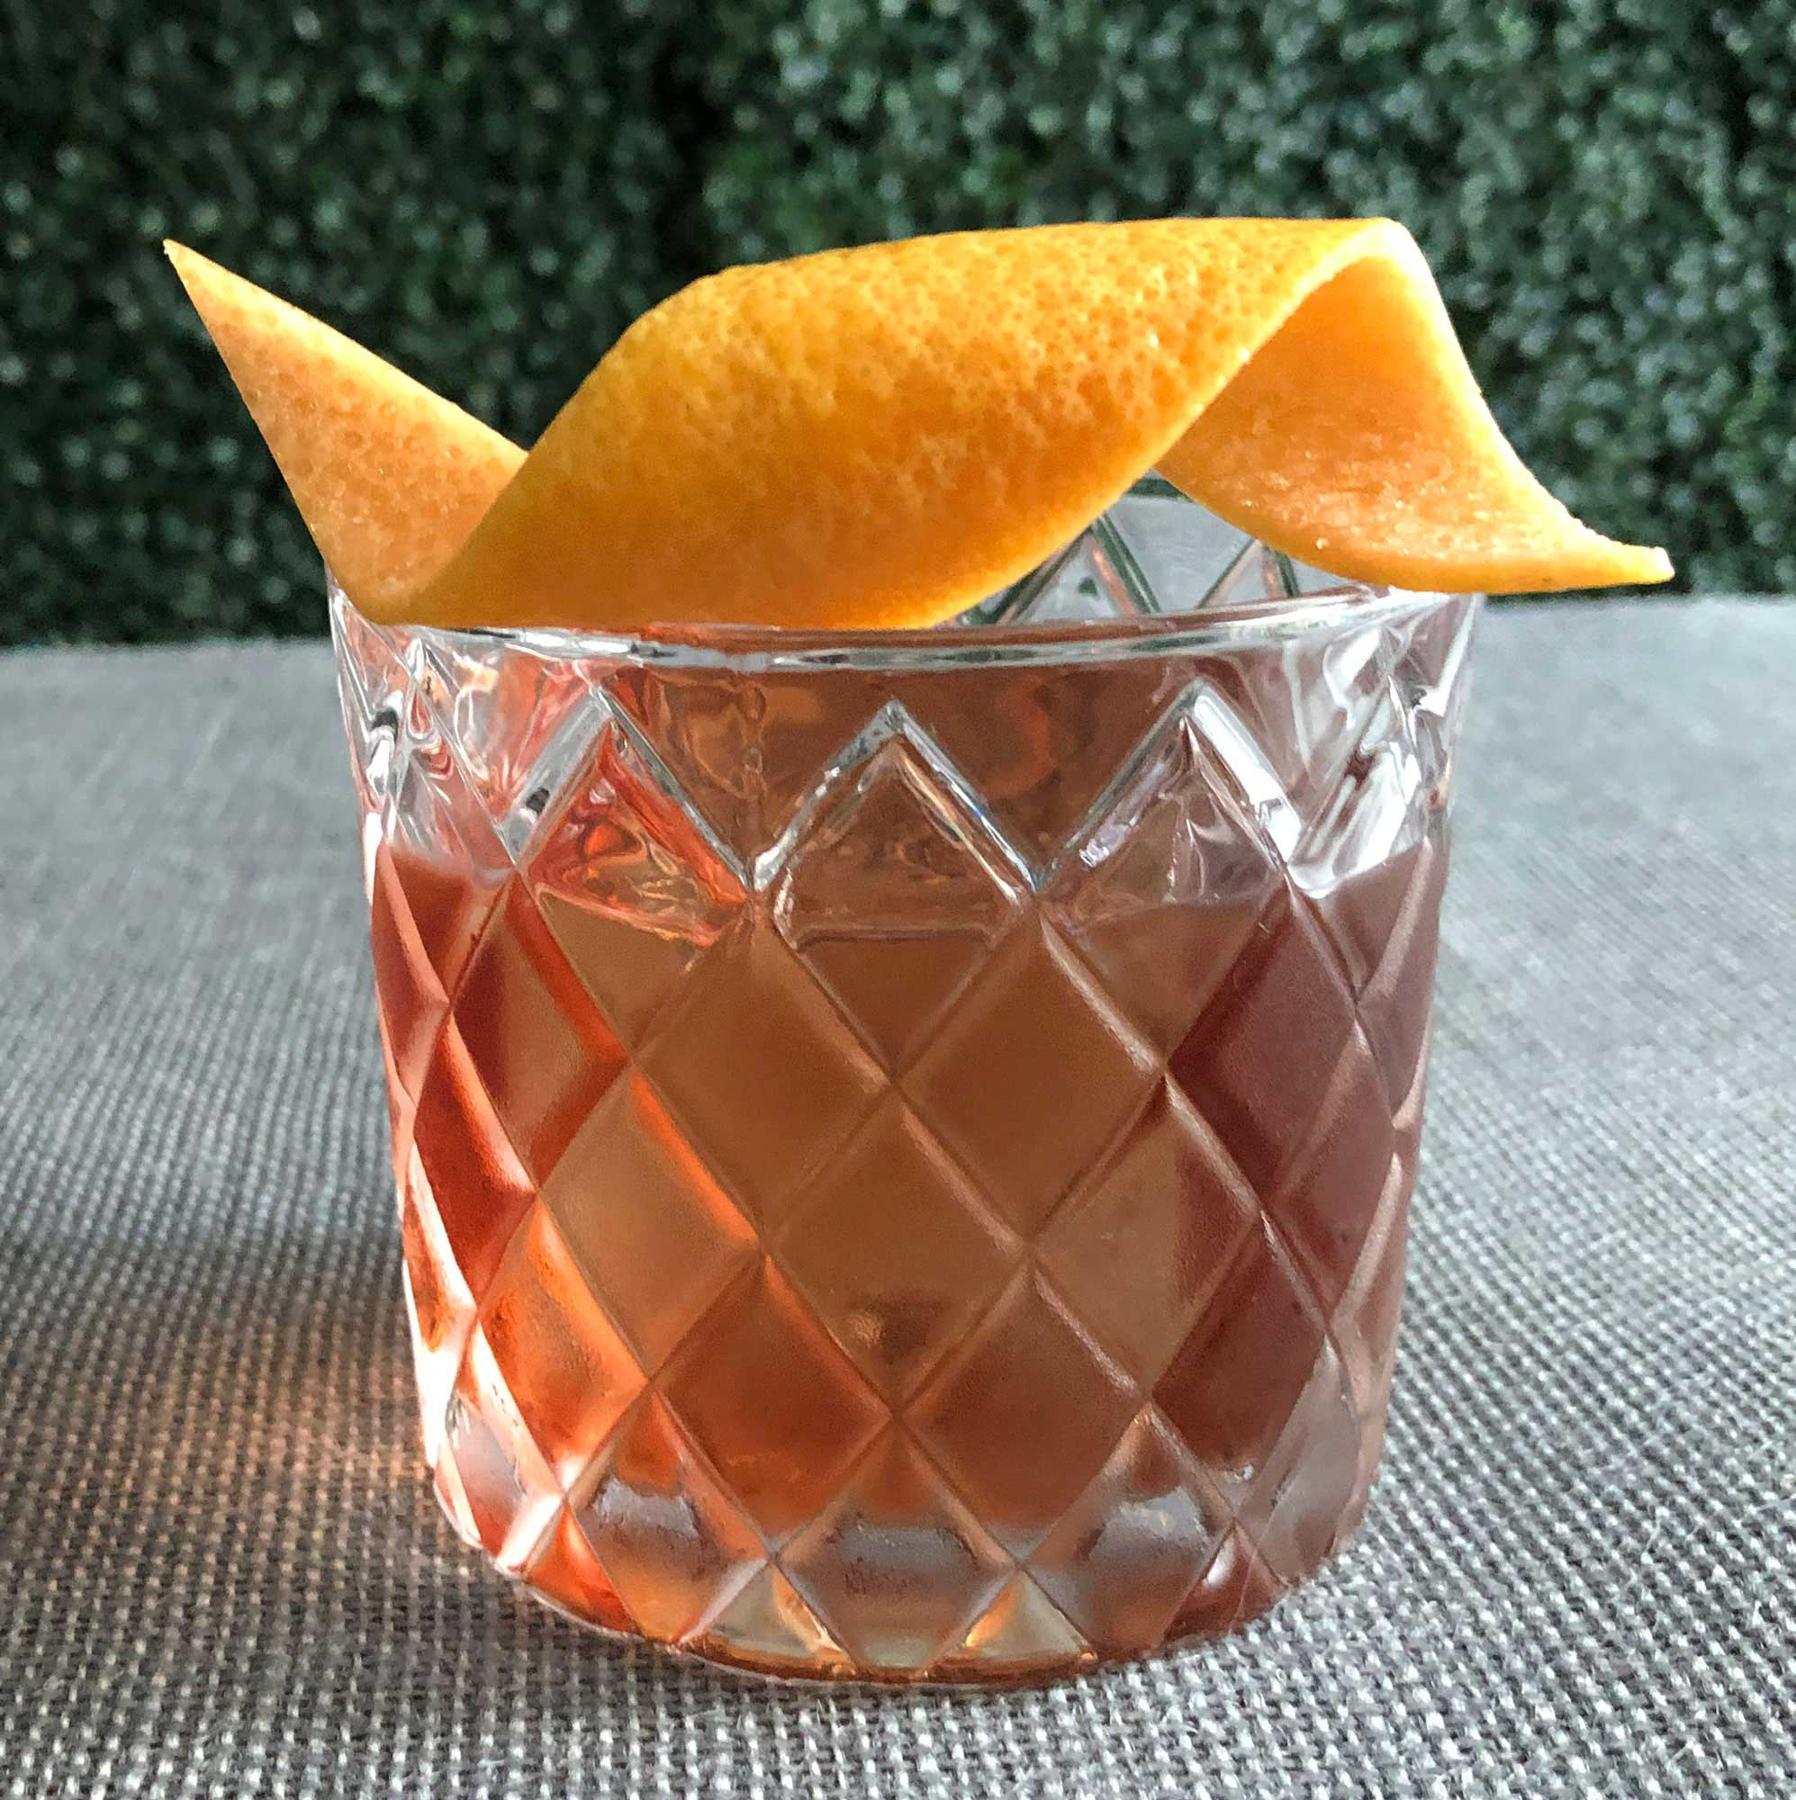 An example of the Count of Mount Kisco, the mixed drink (drink), by Scott Krahn, New York City, featuring Averell Damson Plum Gin Liqueur, Dolin Dry Vermouth de Chambéry, Salers Gentian Apéritif, and grapefruit twist; photo by Lee Edwards